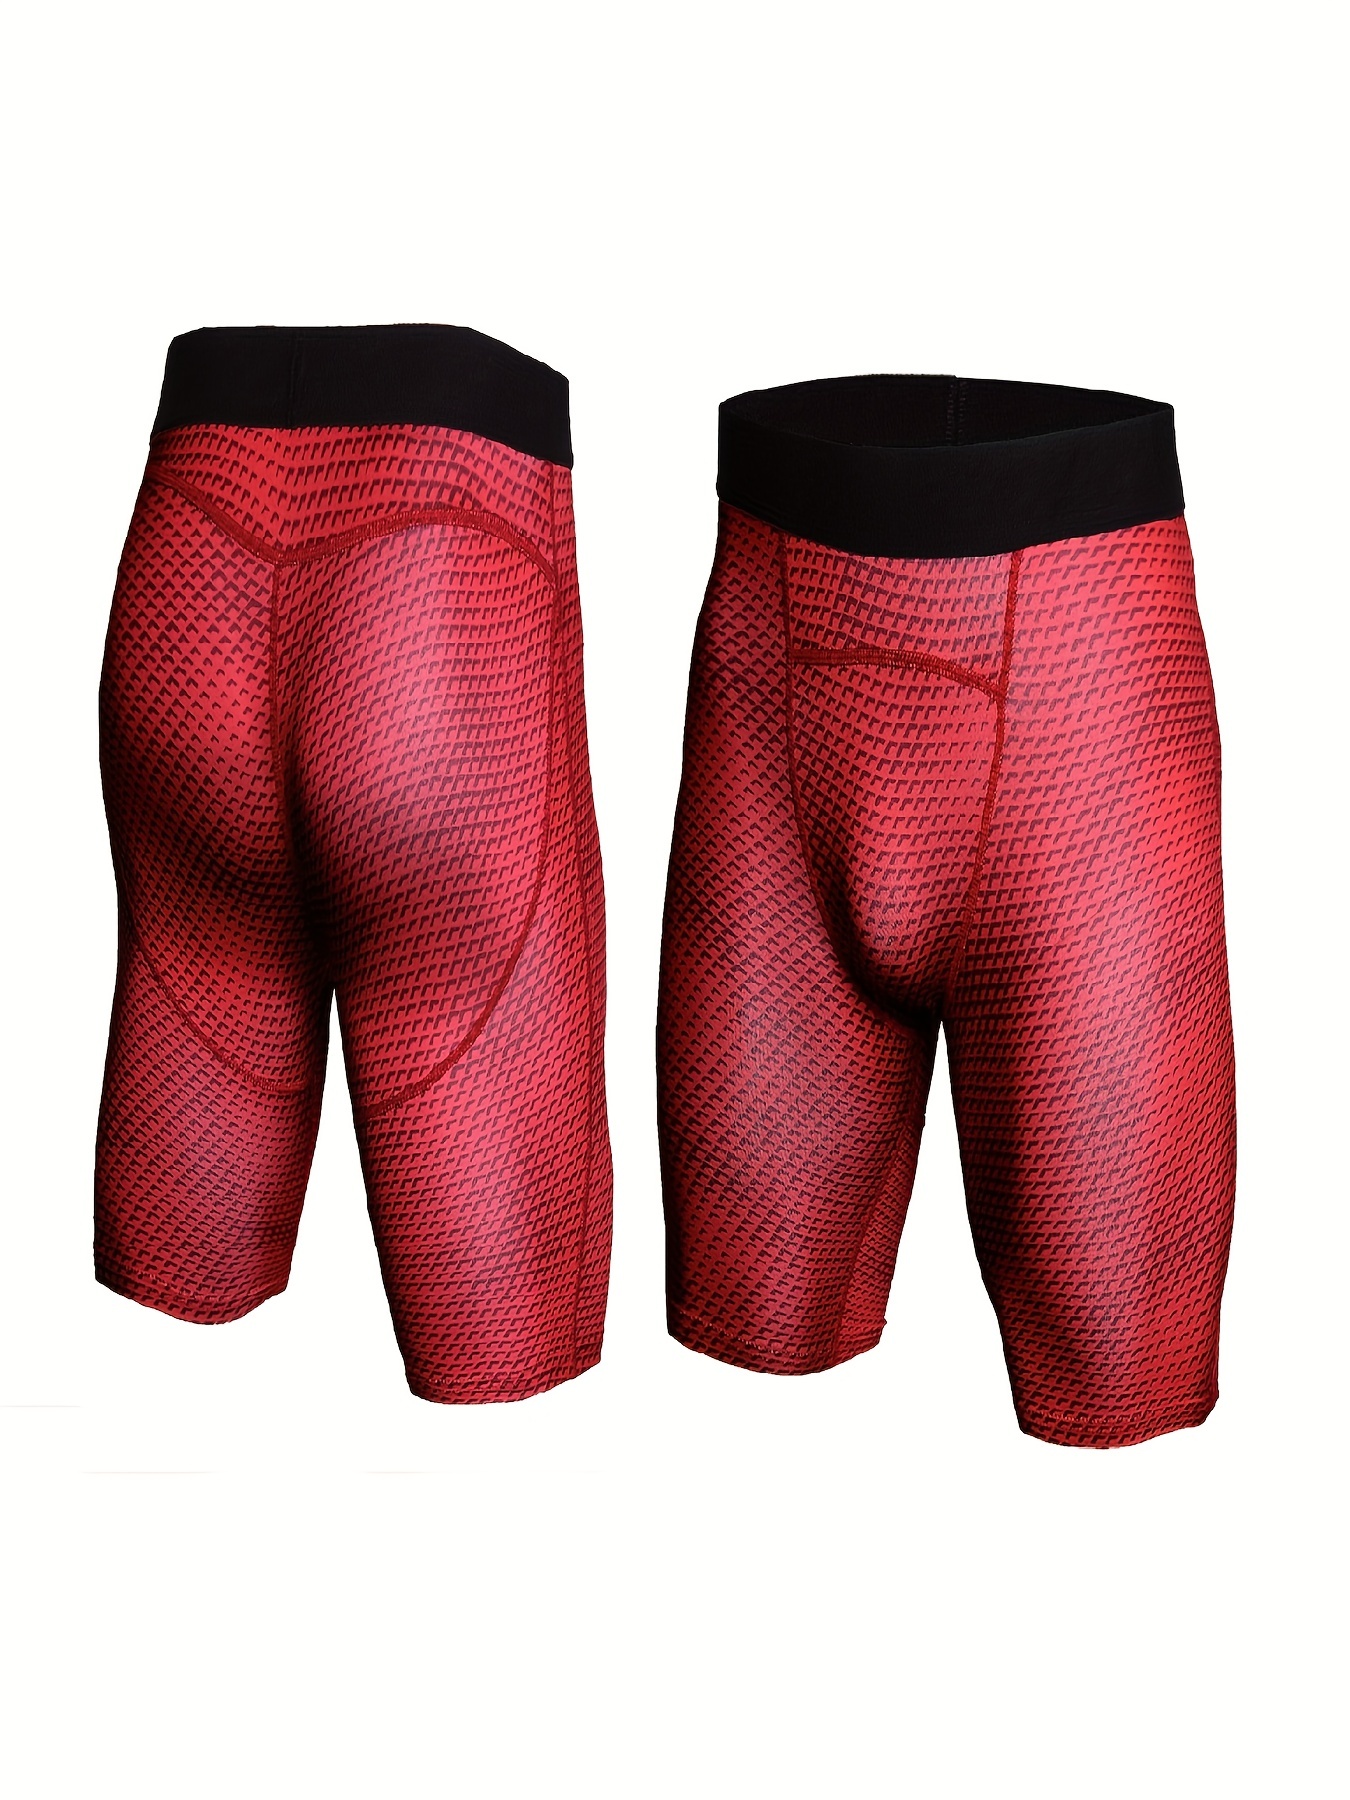 Men's Outdoor Sports Quick-Drying Running Shorts, Basketball Compression  Shorts For Gym Exercise